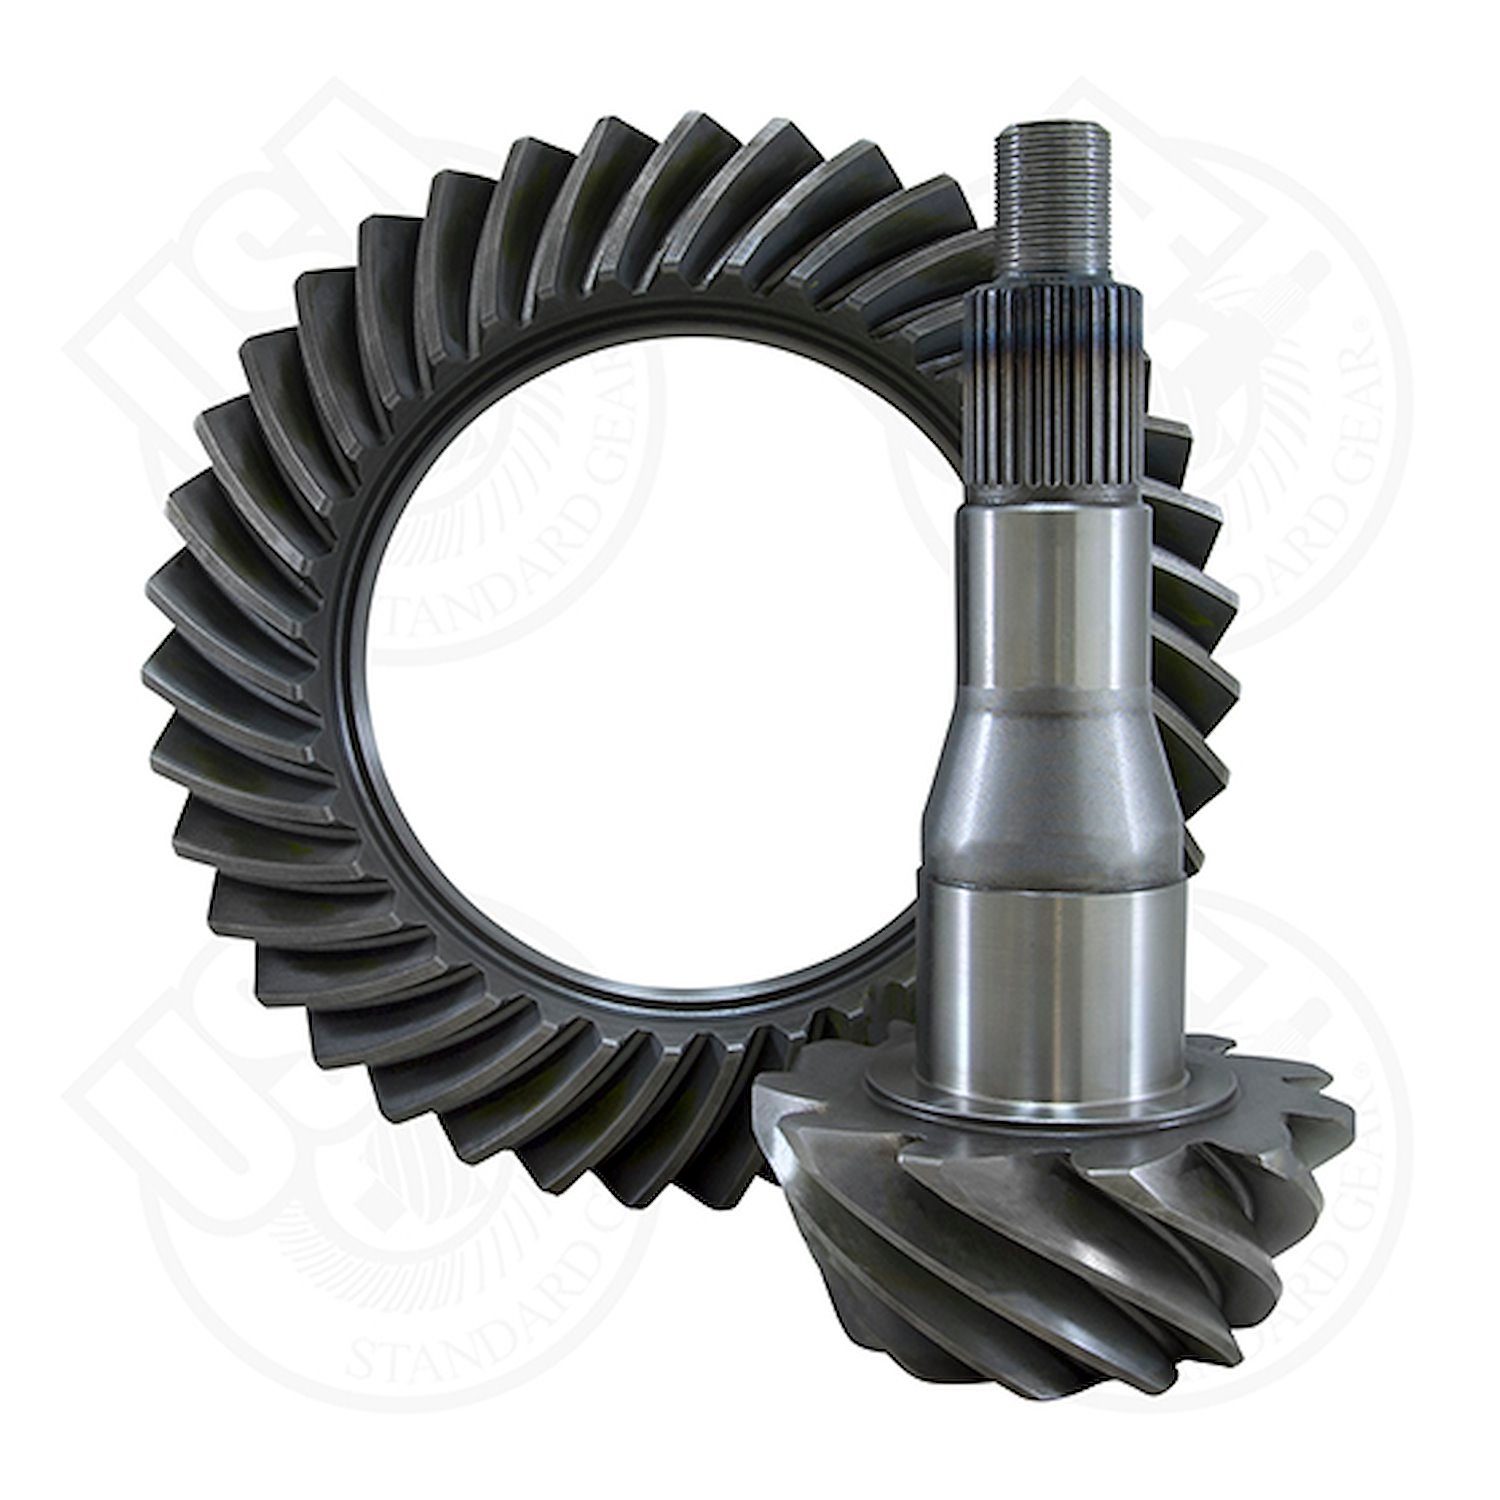 USA Standard Ring / Pinion 11 / up Ford 9.75 3.55 ratio